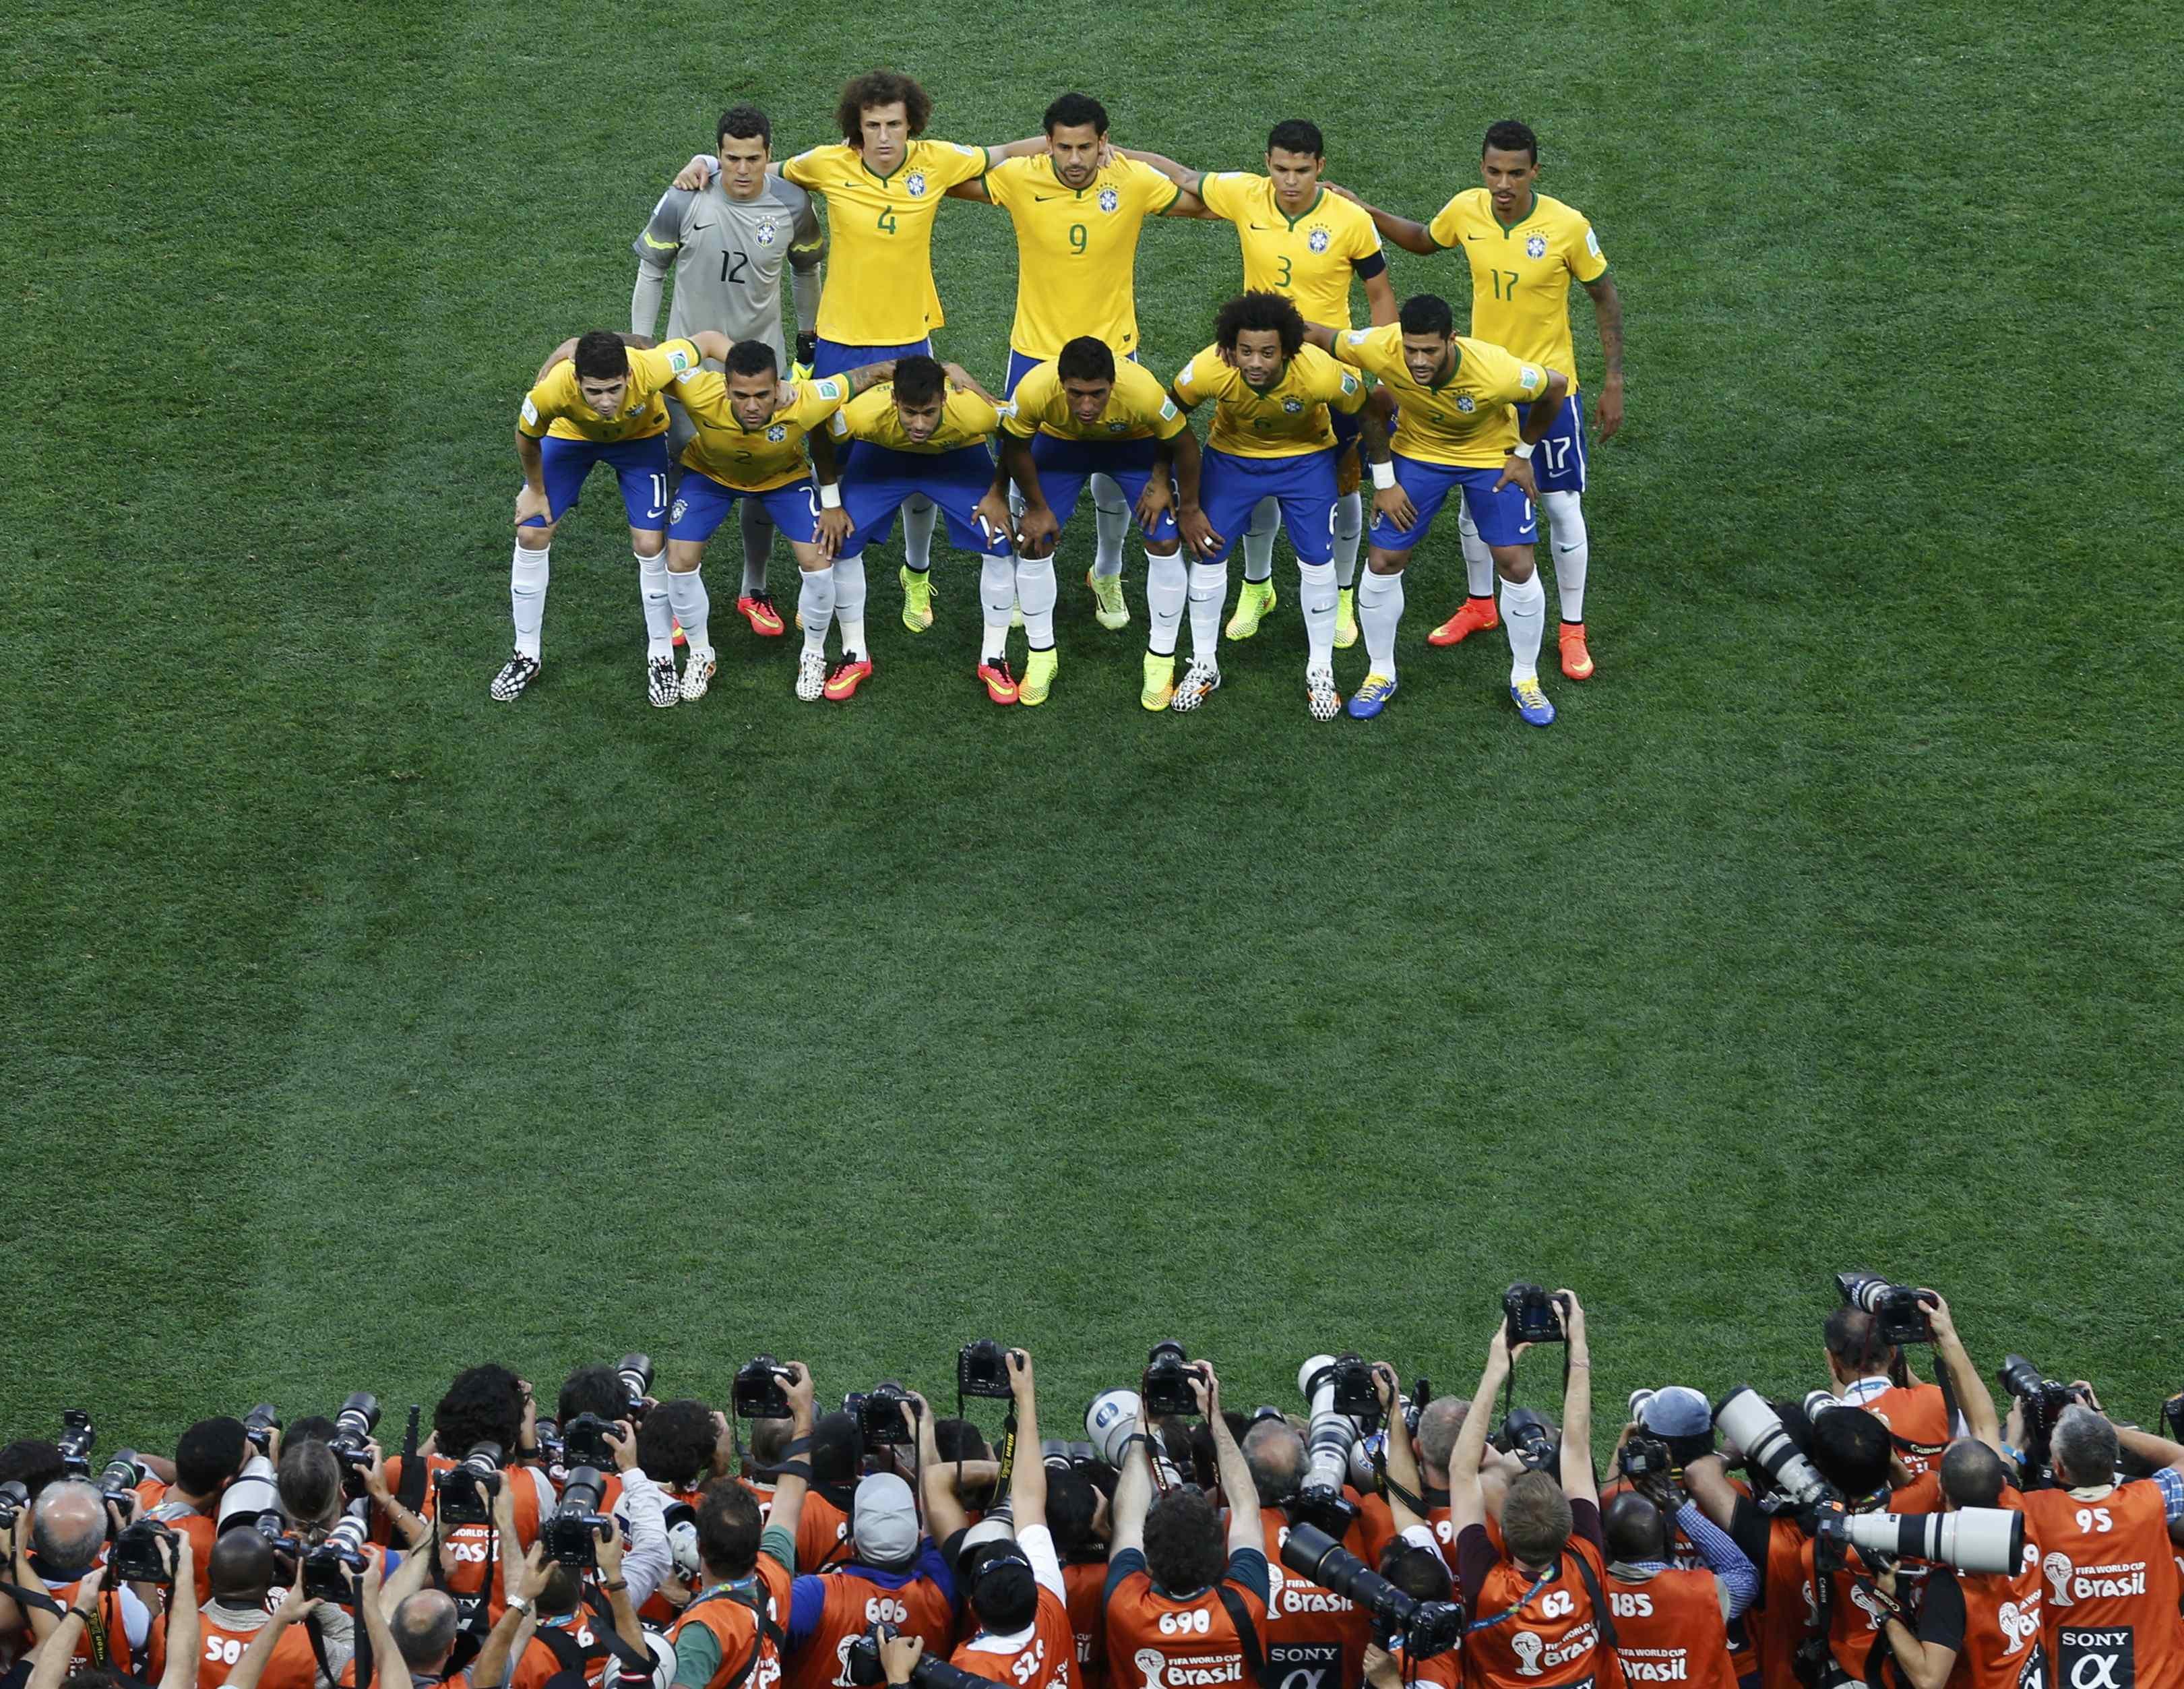 Brazil's national soccer players pose for a team photo before their 2014 World Cup opening match against Croatia at the Corinthians arena in Sao Paulo on June 12, 2014. (Paulo Whitaker—Reuters)